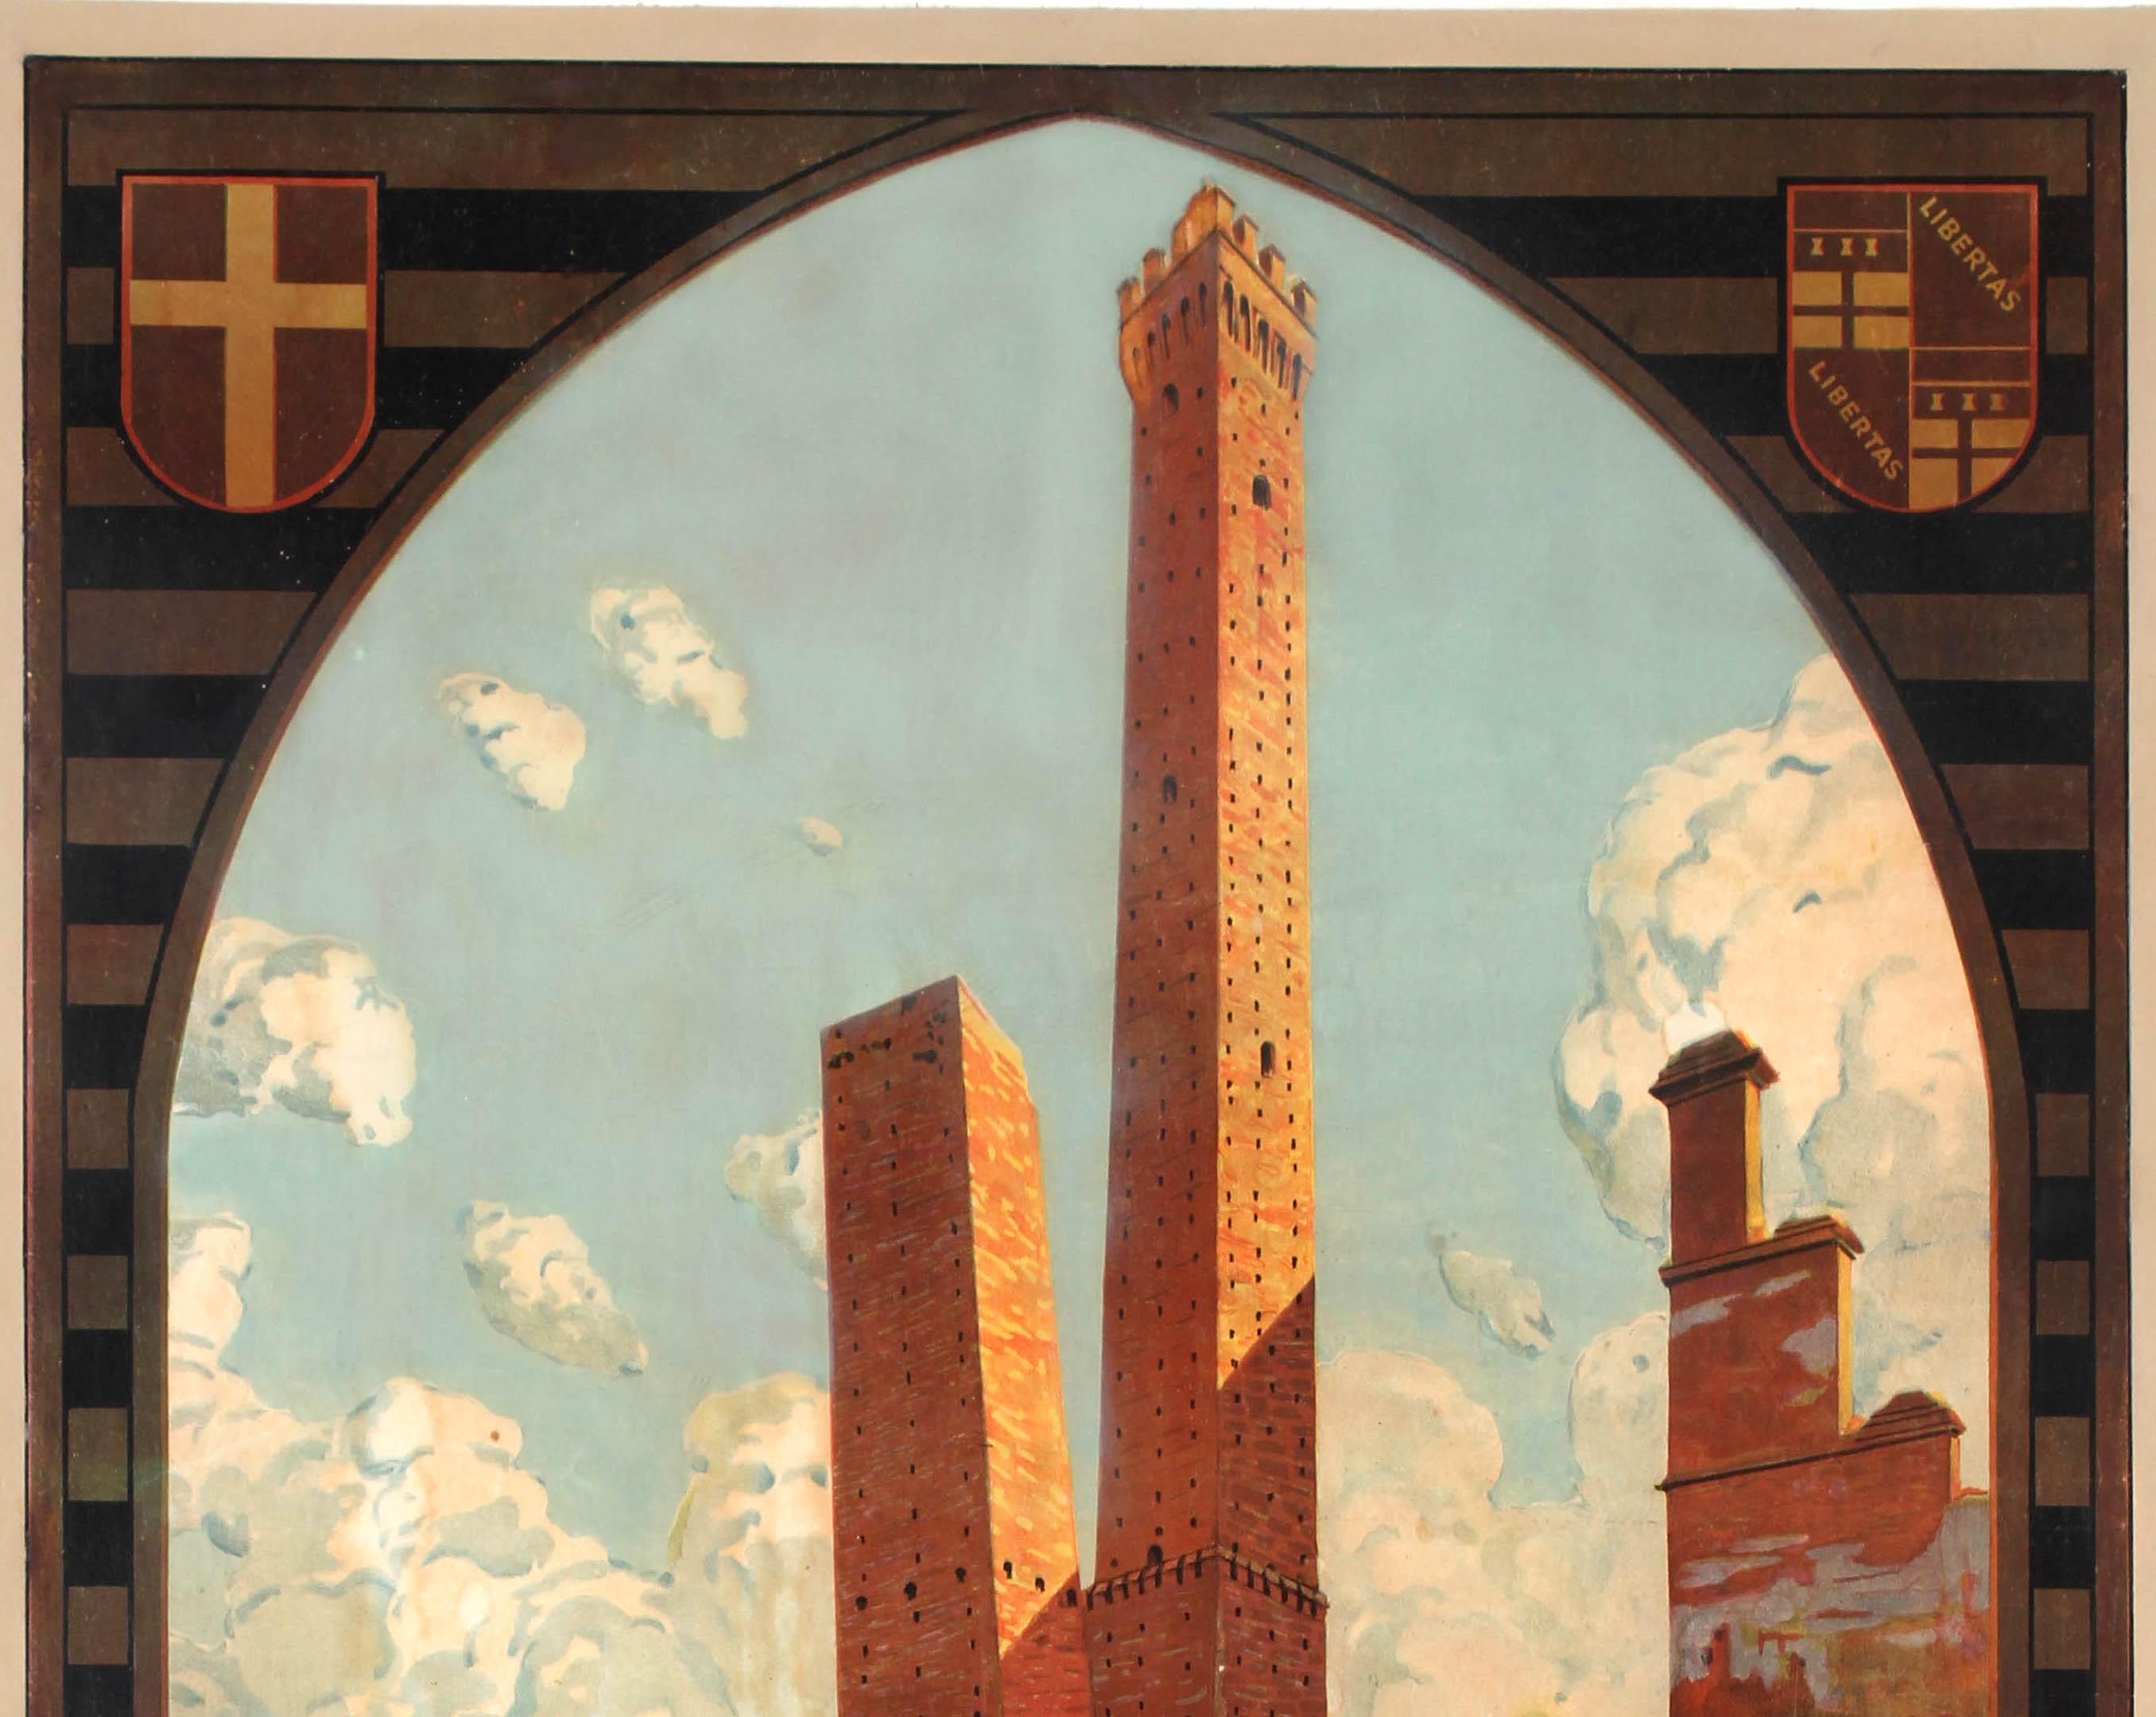 Original Vintage Travel Poster Bologna Italy Two Towers Asinelli Garisenda ENIT - Print by Severino Tremator